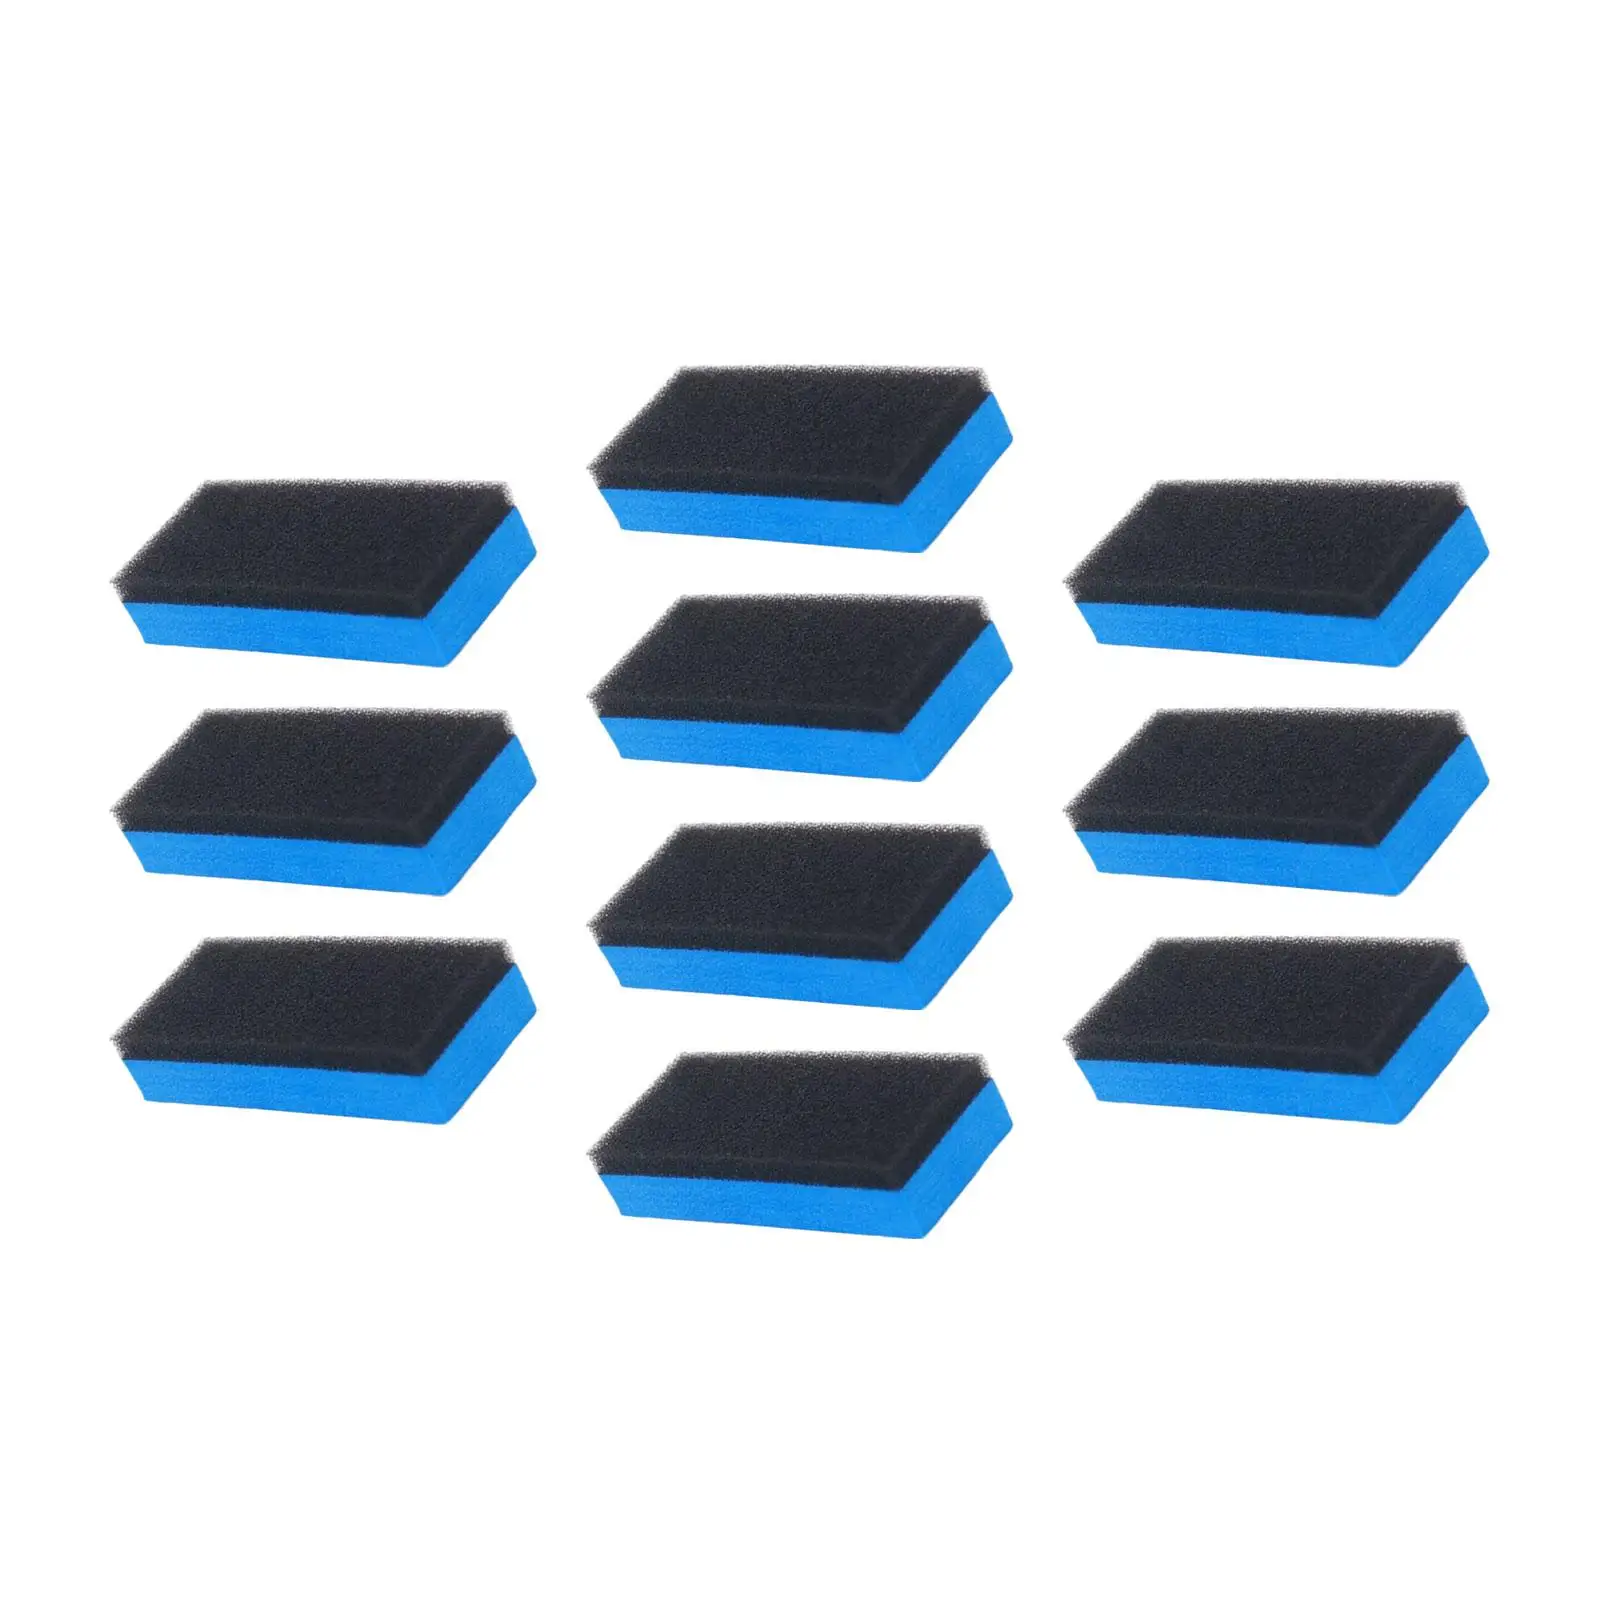 Sponge Applicator Pads Multifunctional Cleaning Sponge Square Cleaning Pad for Bathroom Workshop Motorcycles Car Home